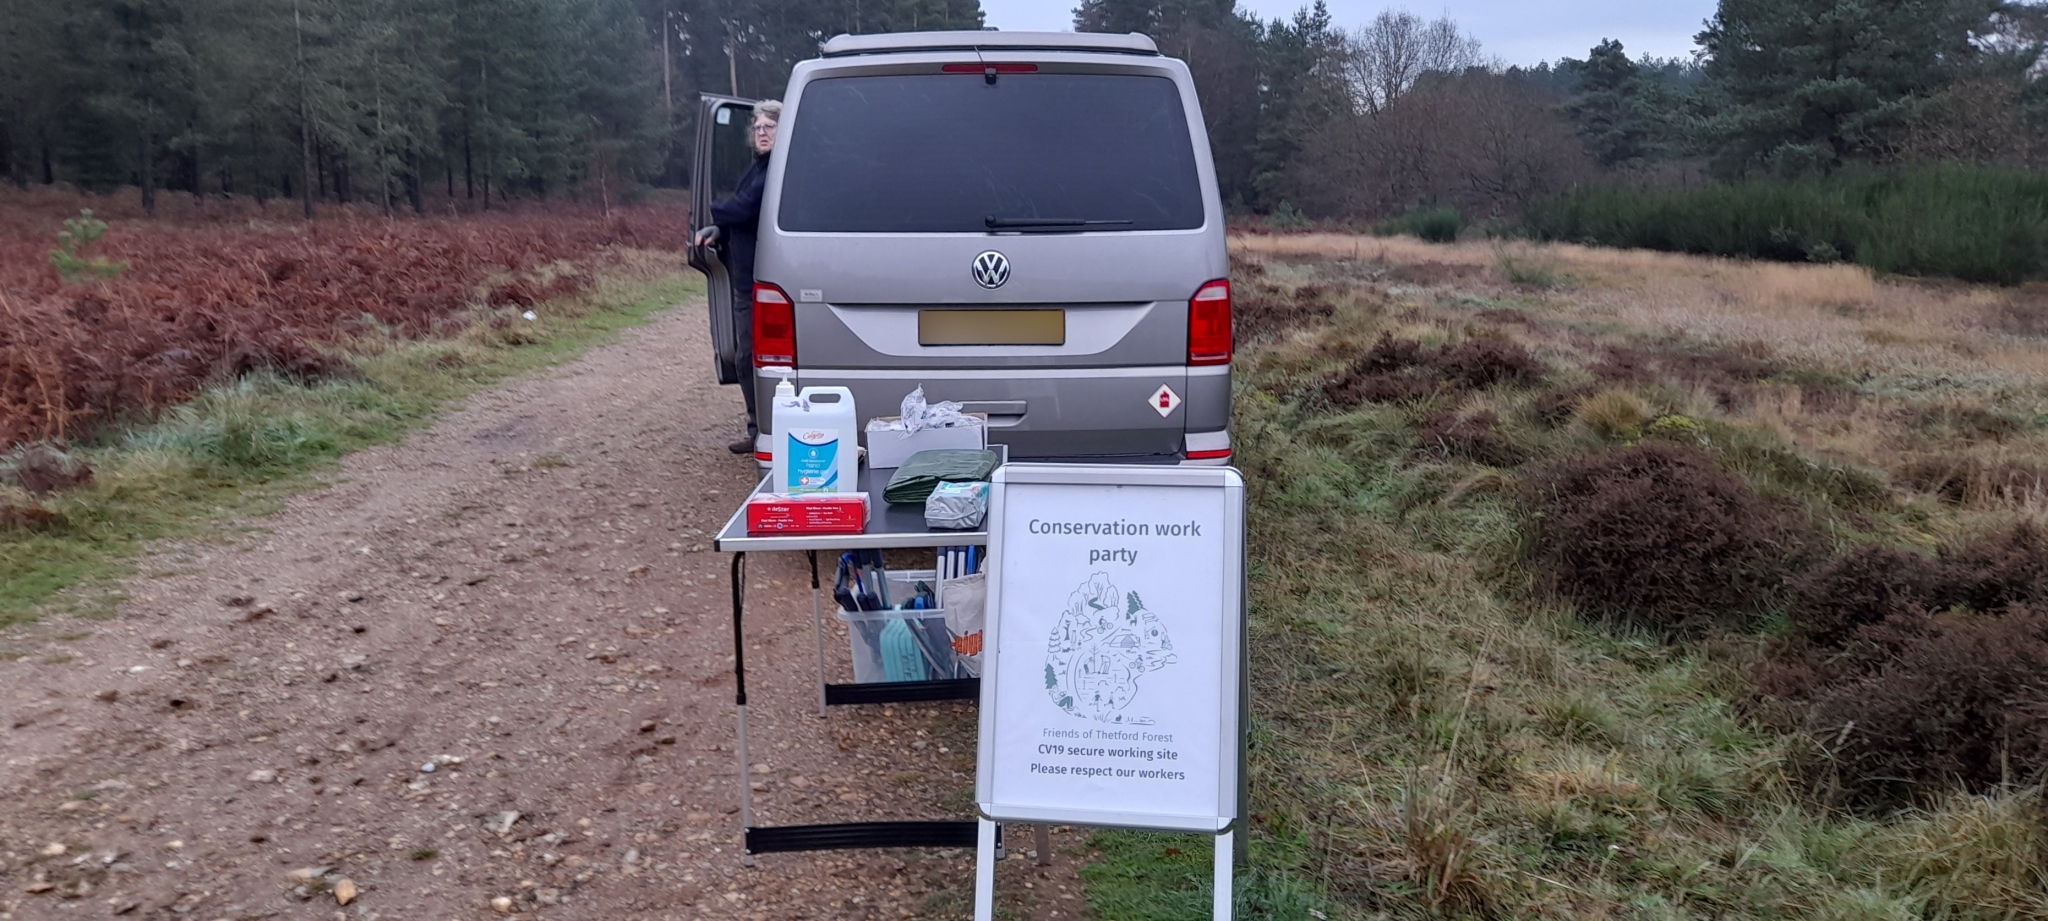 A photo from the FoTF Conservation Event - December 2020 - Broom Removal at Santon Street, Santon Downham : The COVID-19 cleaning station